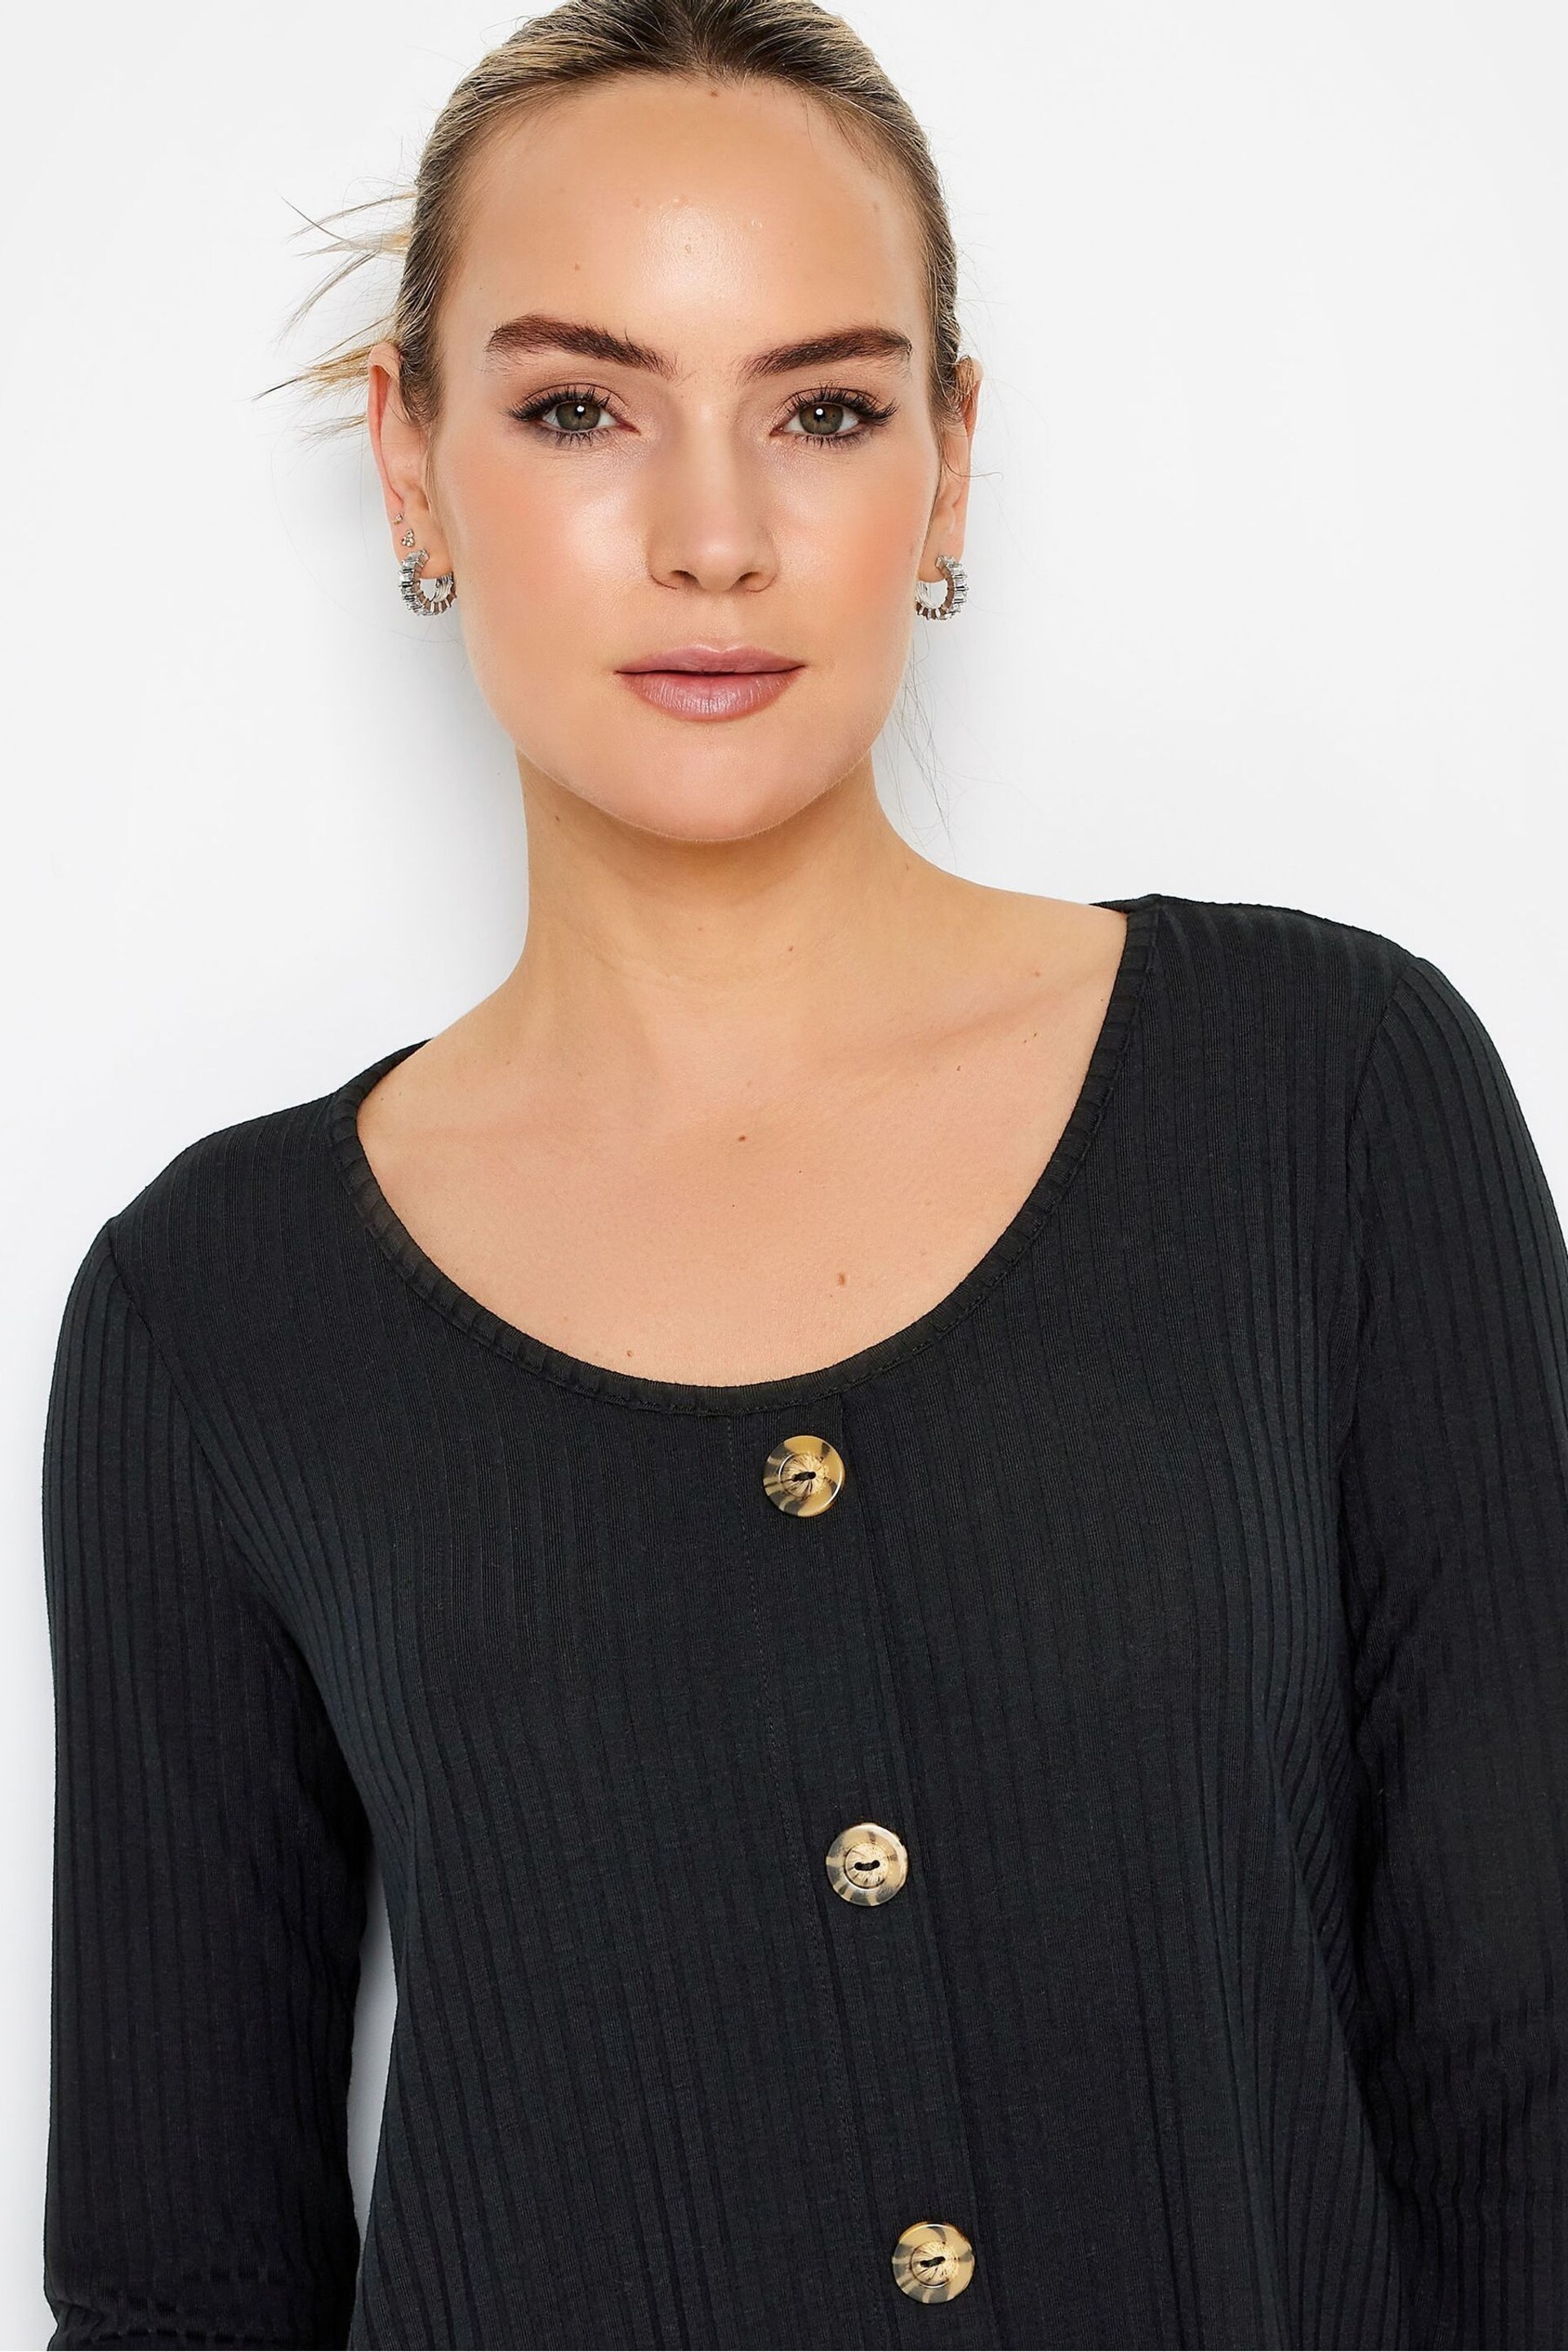 Long Tall Sally Black Scoop Long Sleeve Button Top - Image 4 of 5